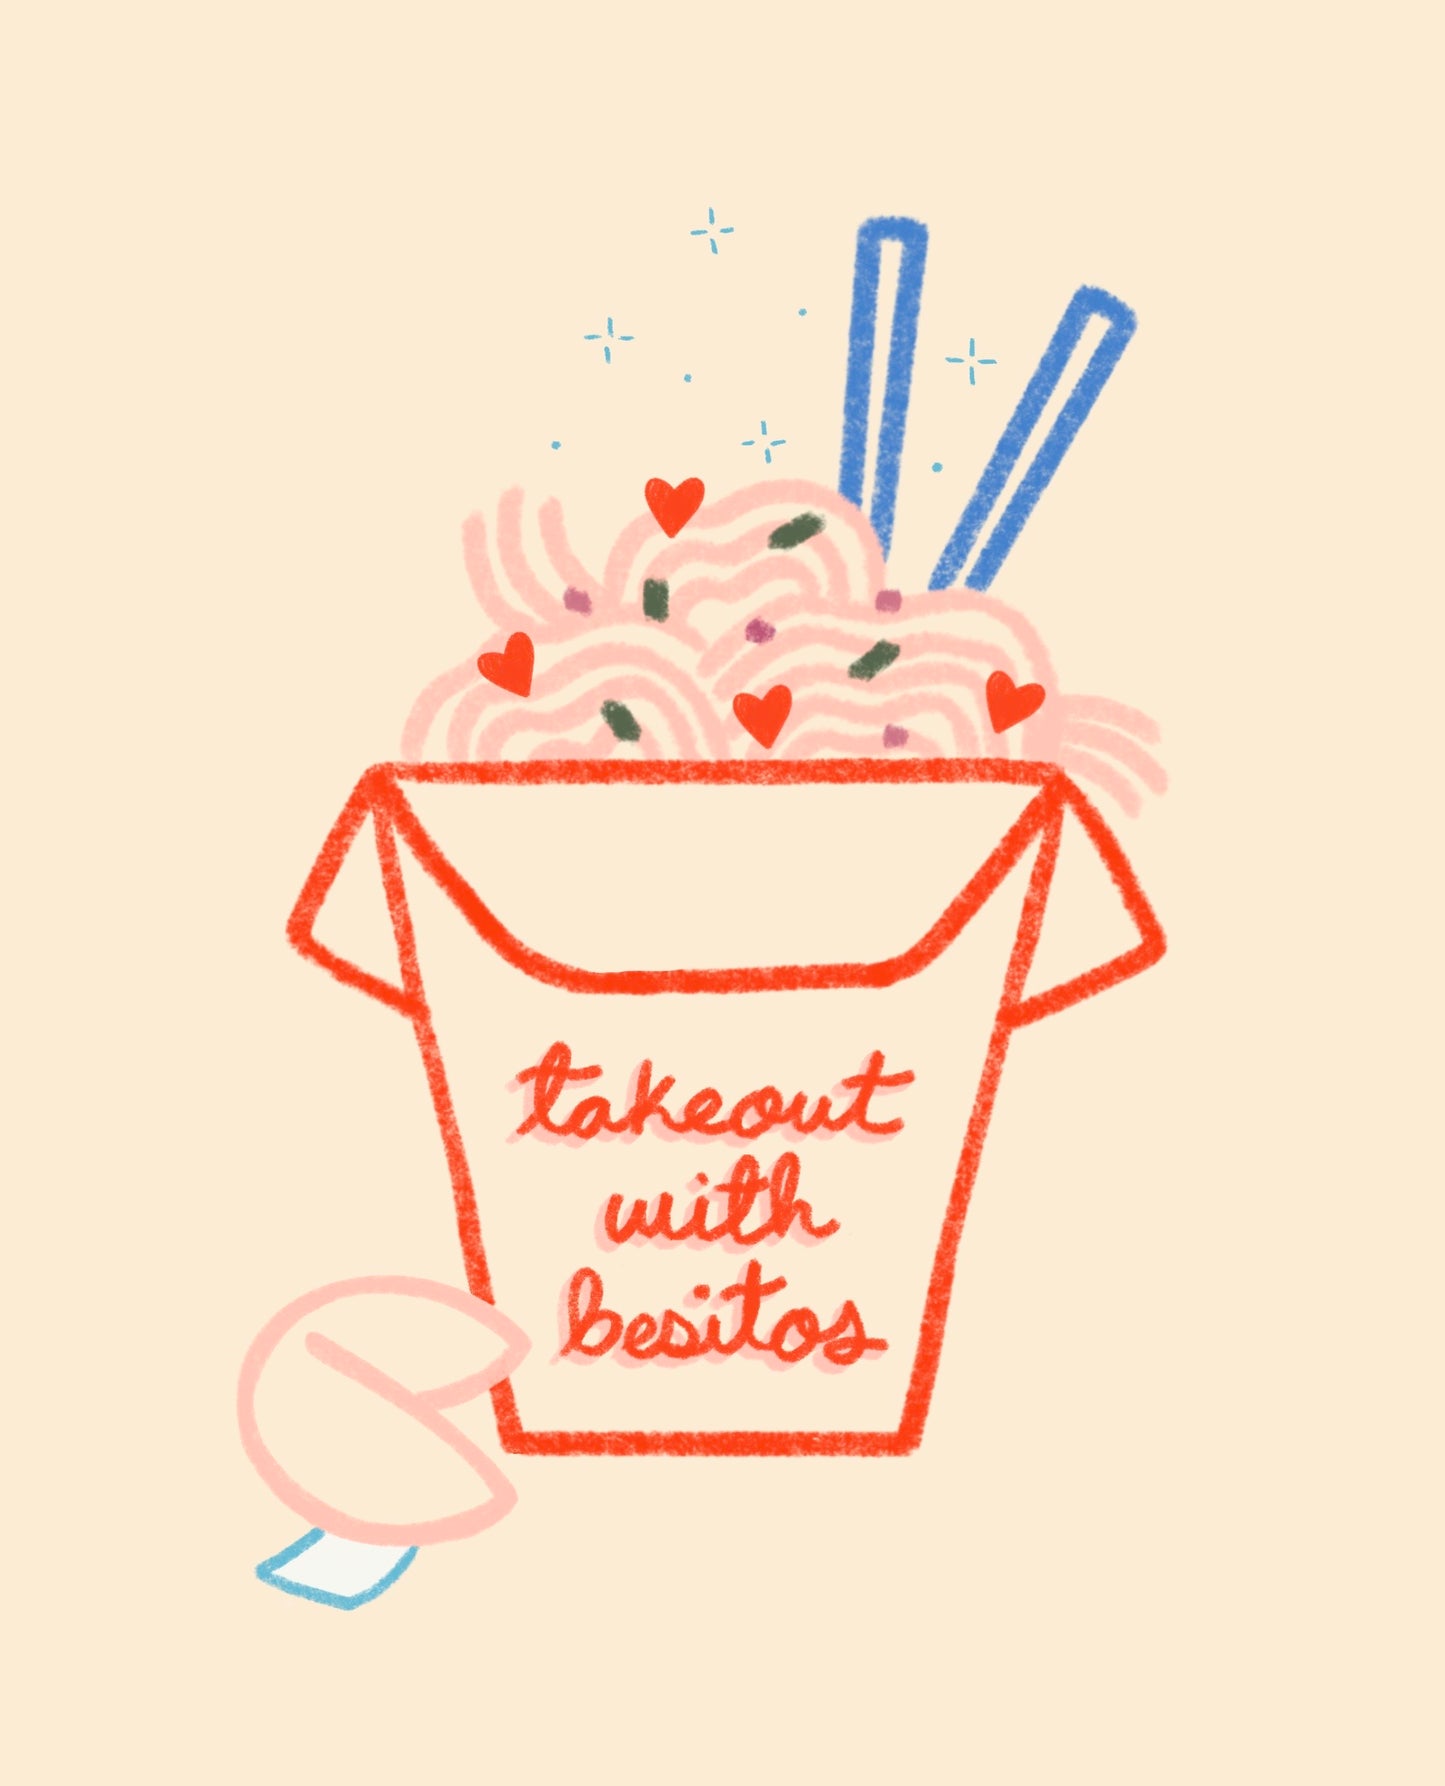 Takeout With Besitos by Moni & Coli